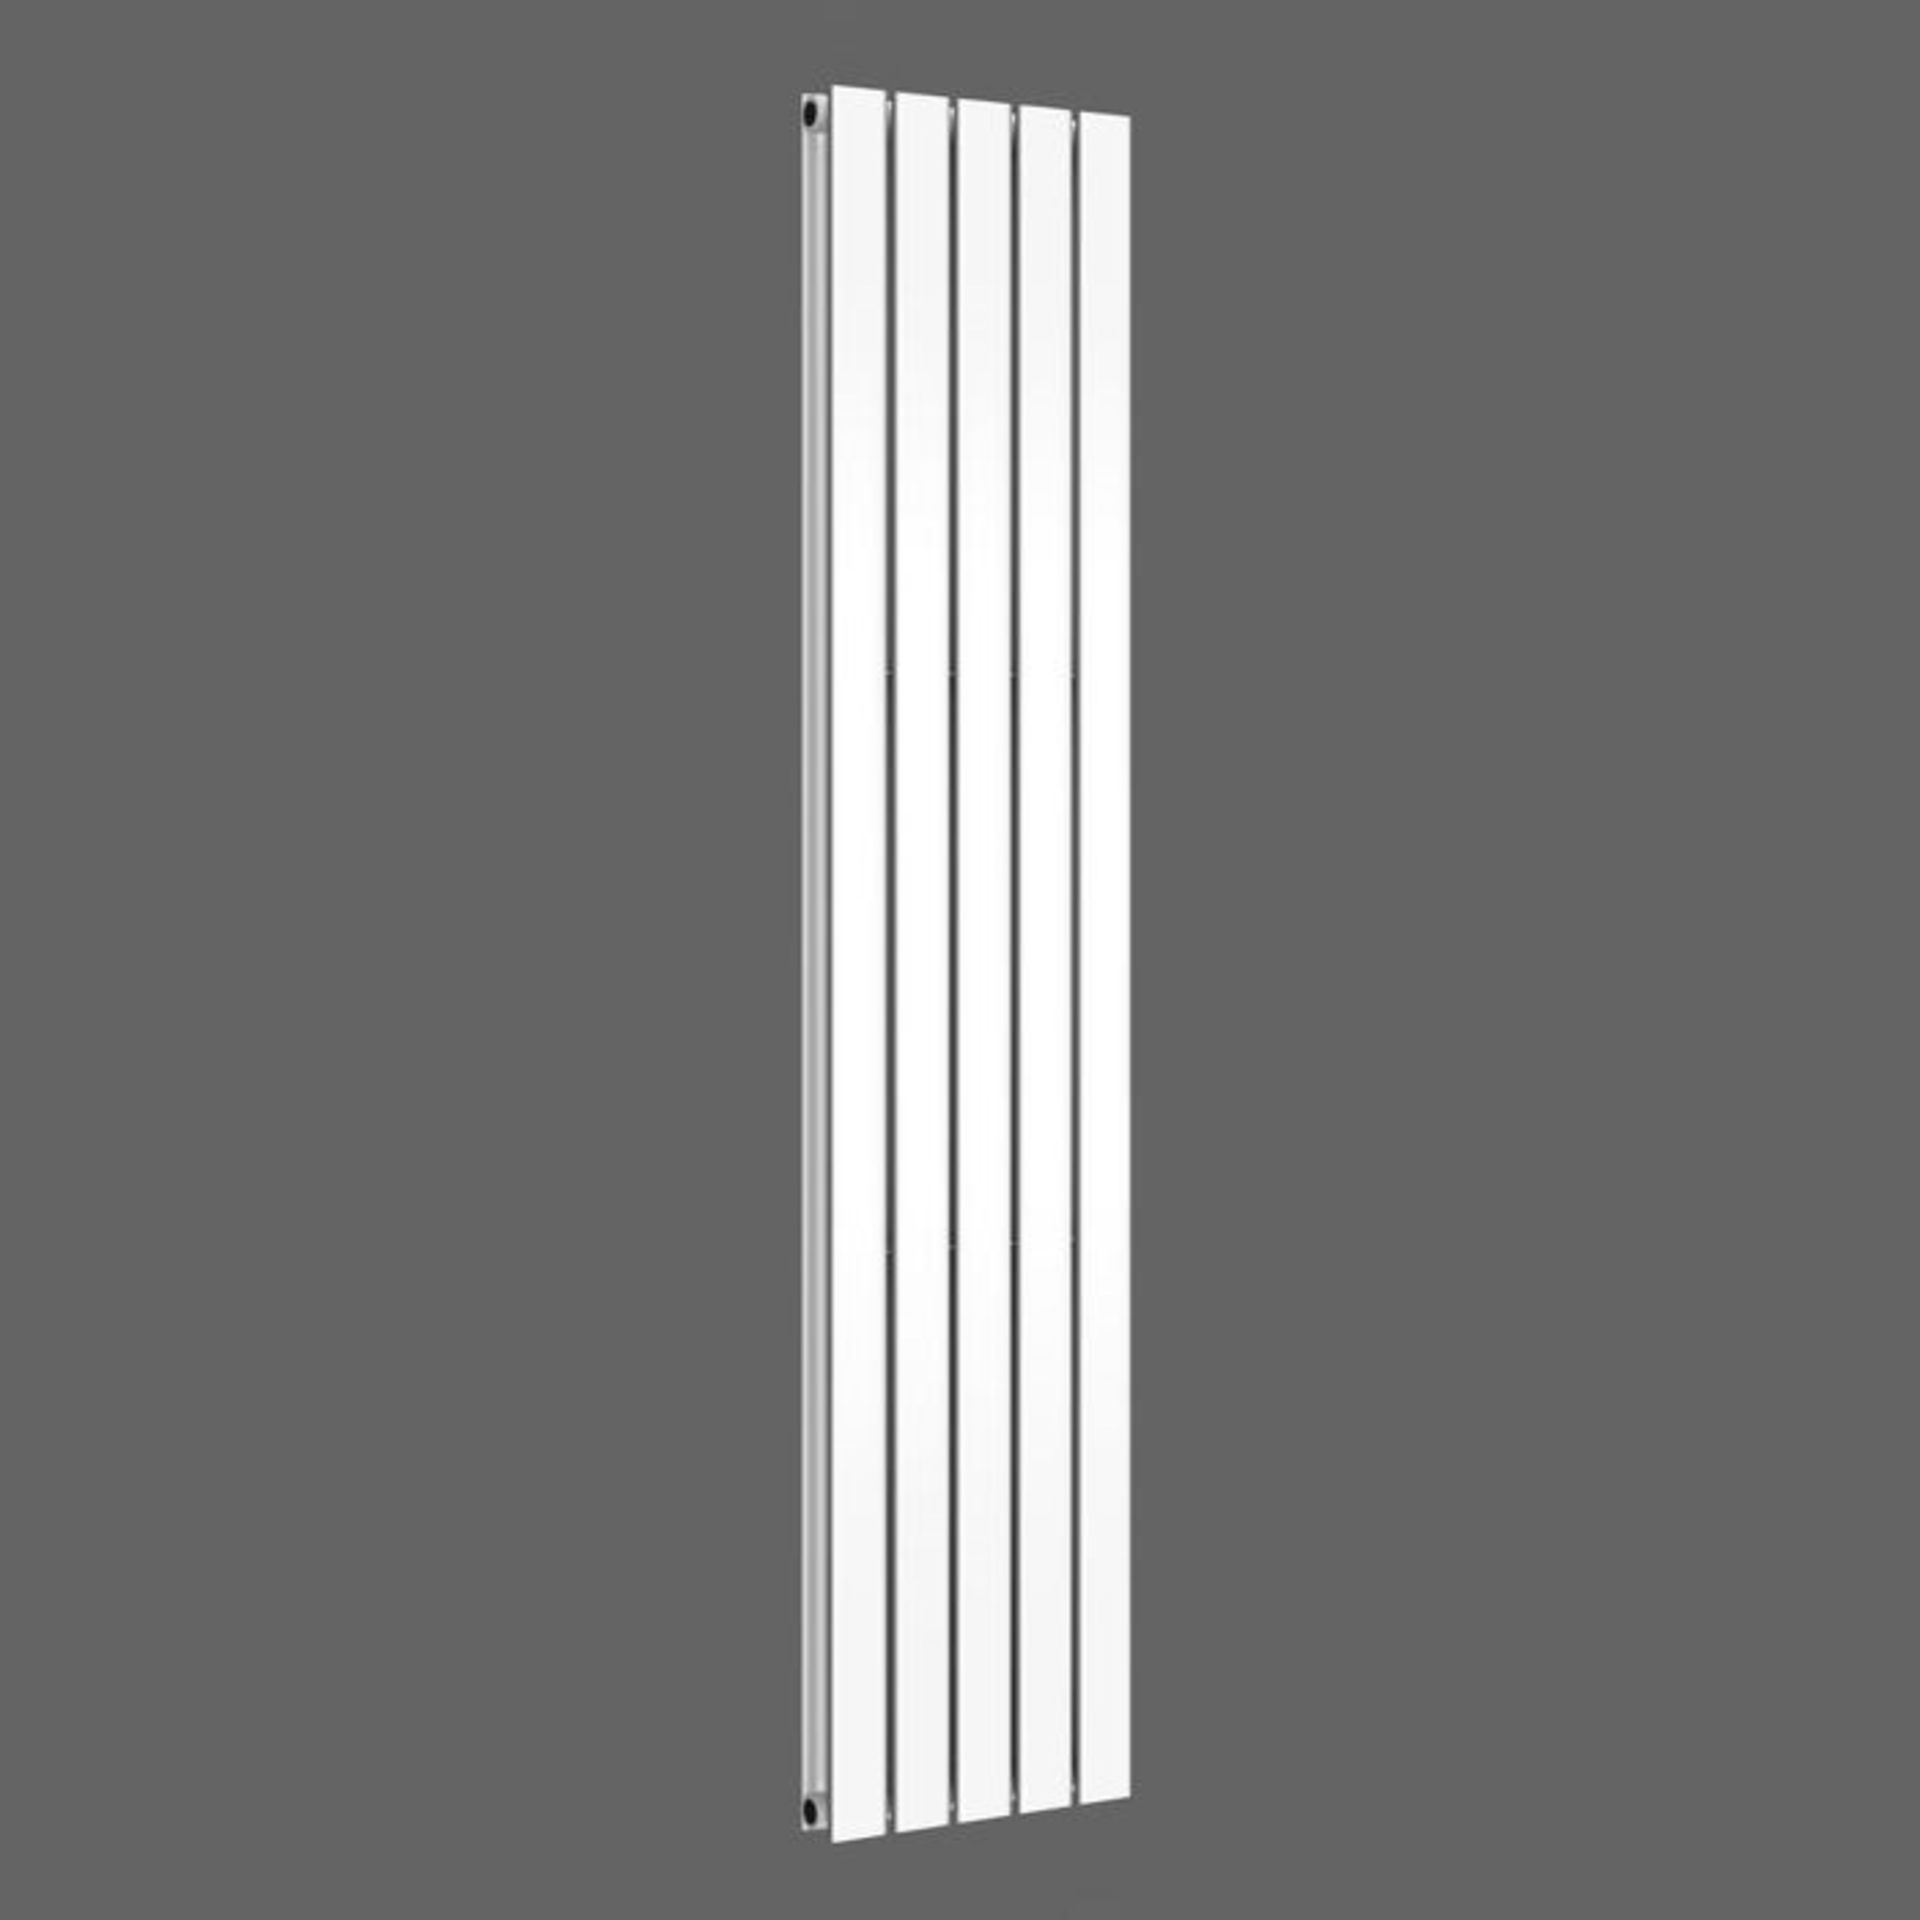 1800x360mm Gloss White Double Flat Panel Vertical Radiator. RRP £307.99.Ultra-modern in desig... - Image 3 of 3